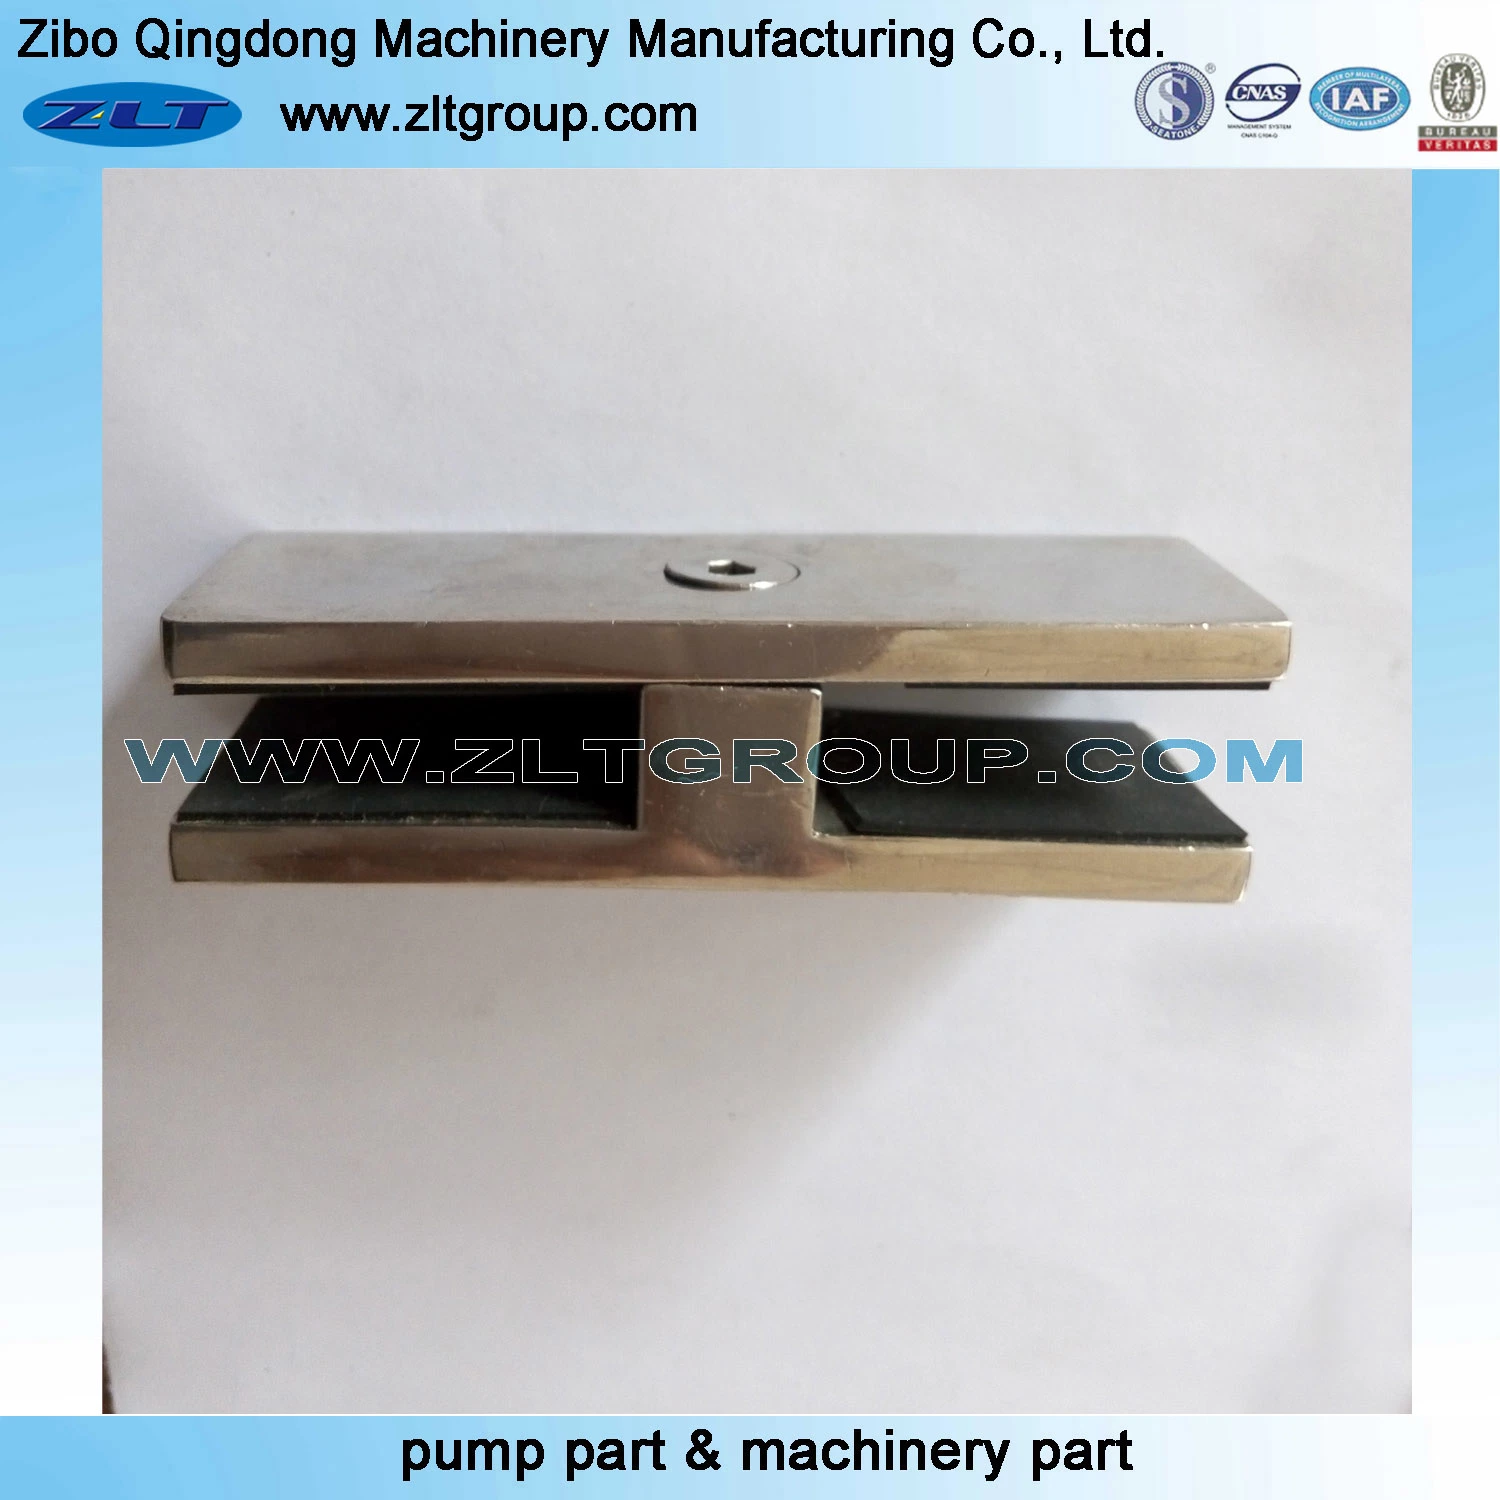 CNC Machining Hardware Parts in Stainless Steel/Alloy/CD4/316ss Used in Machinery Industry